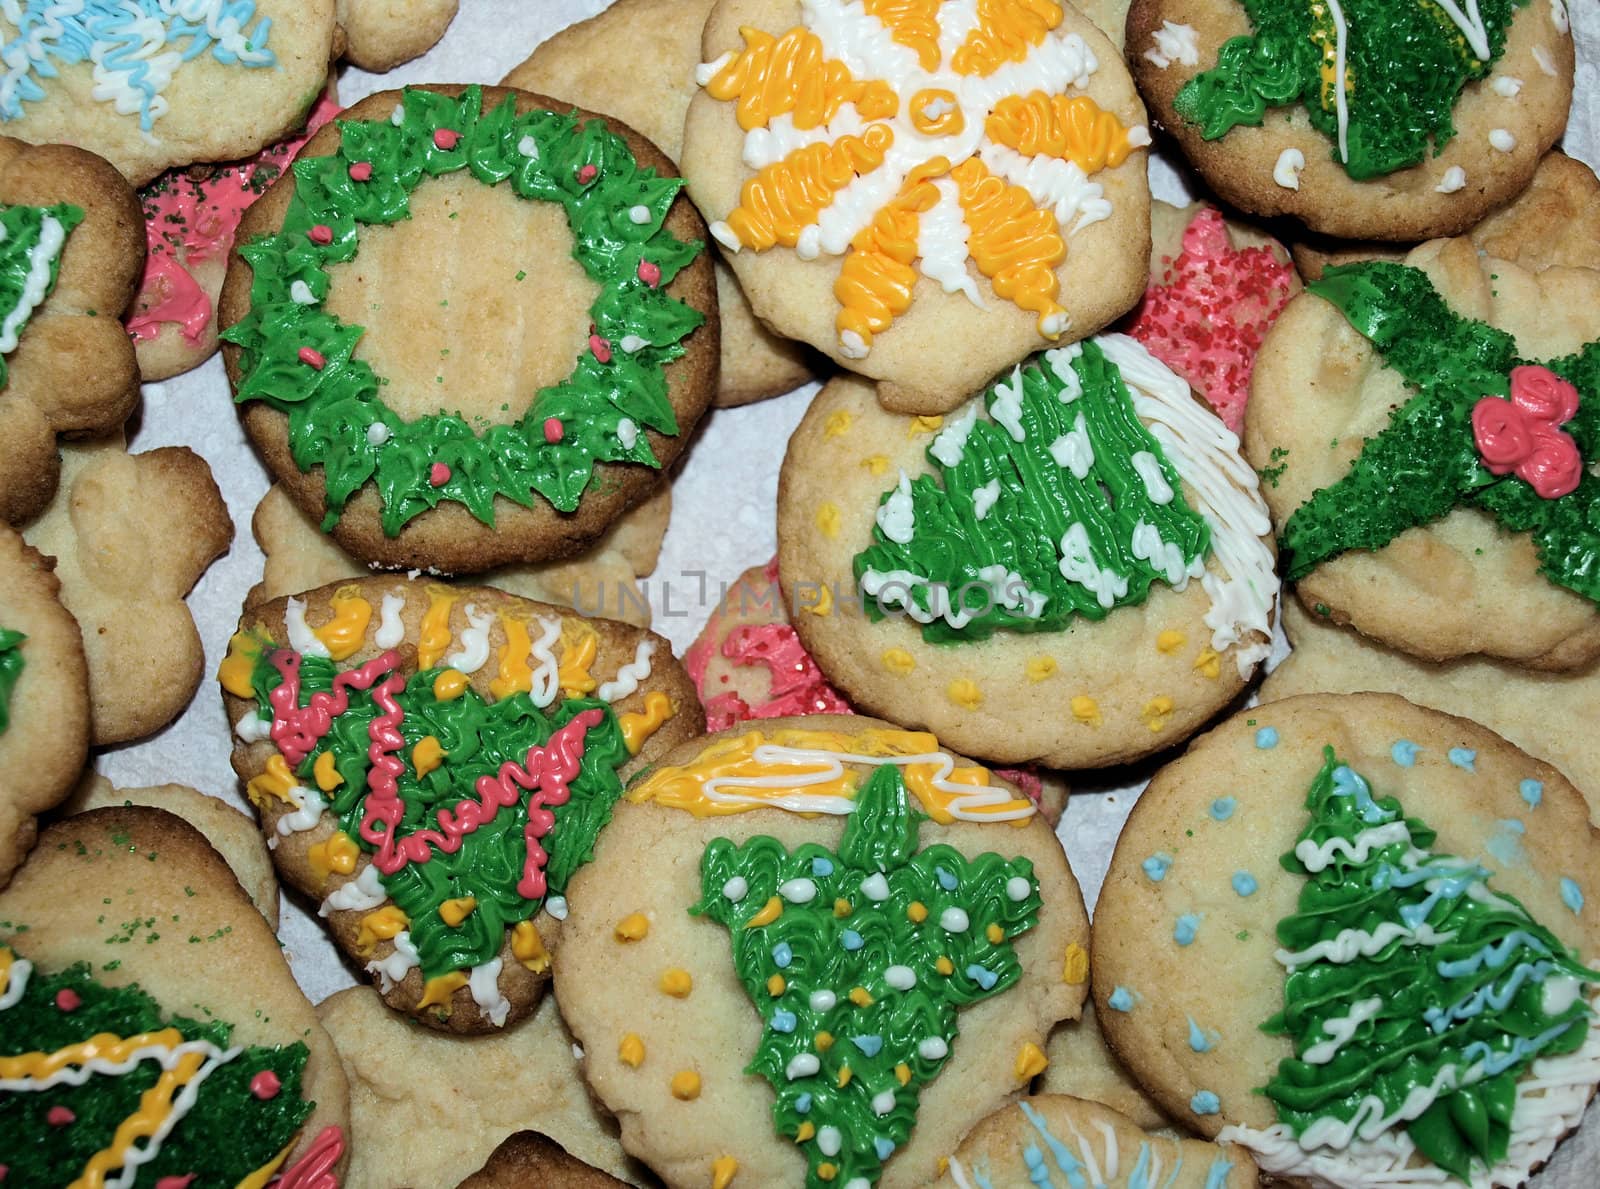 Decorated cookies by northwoodsphoto